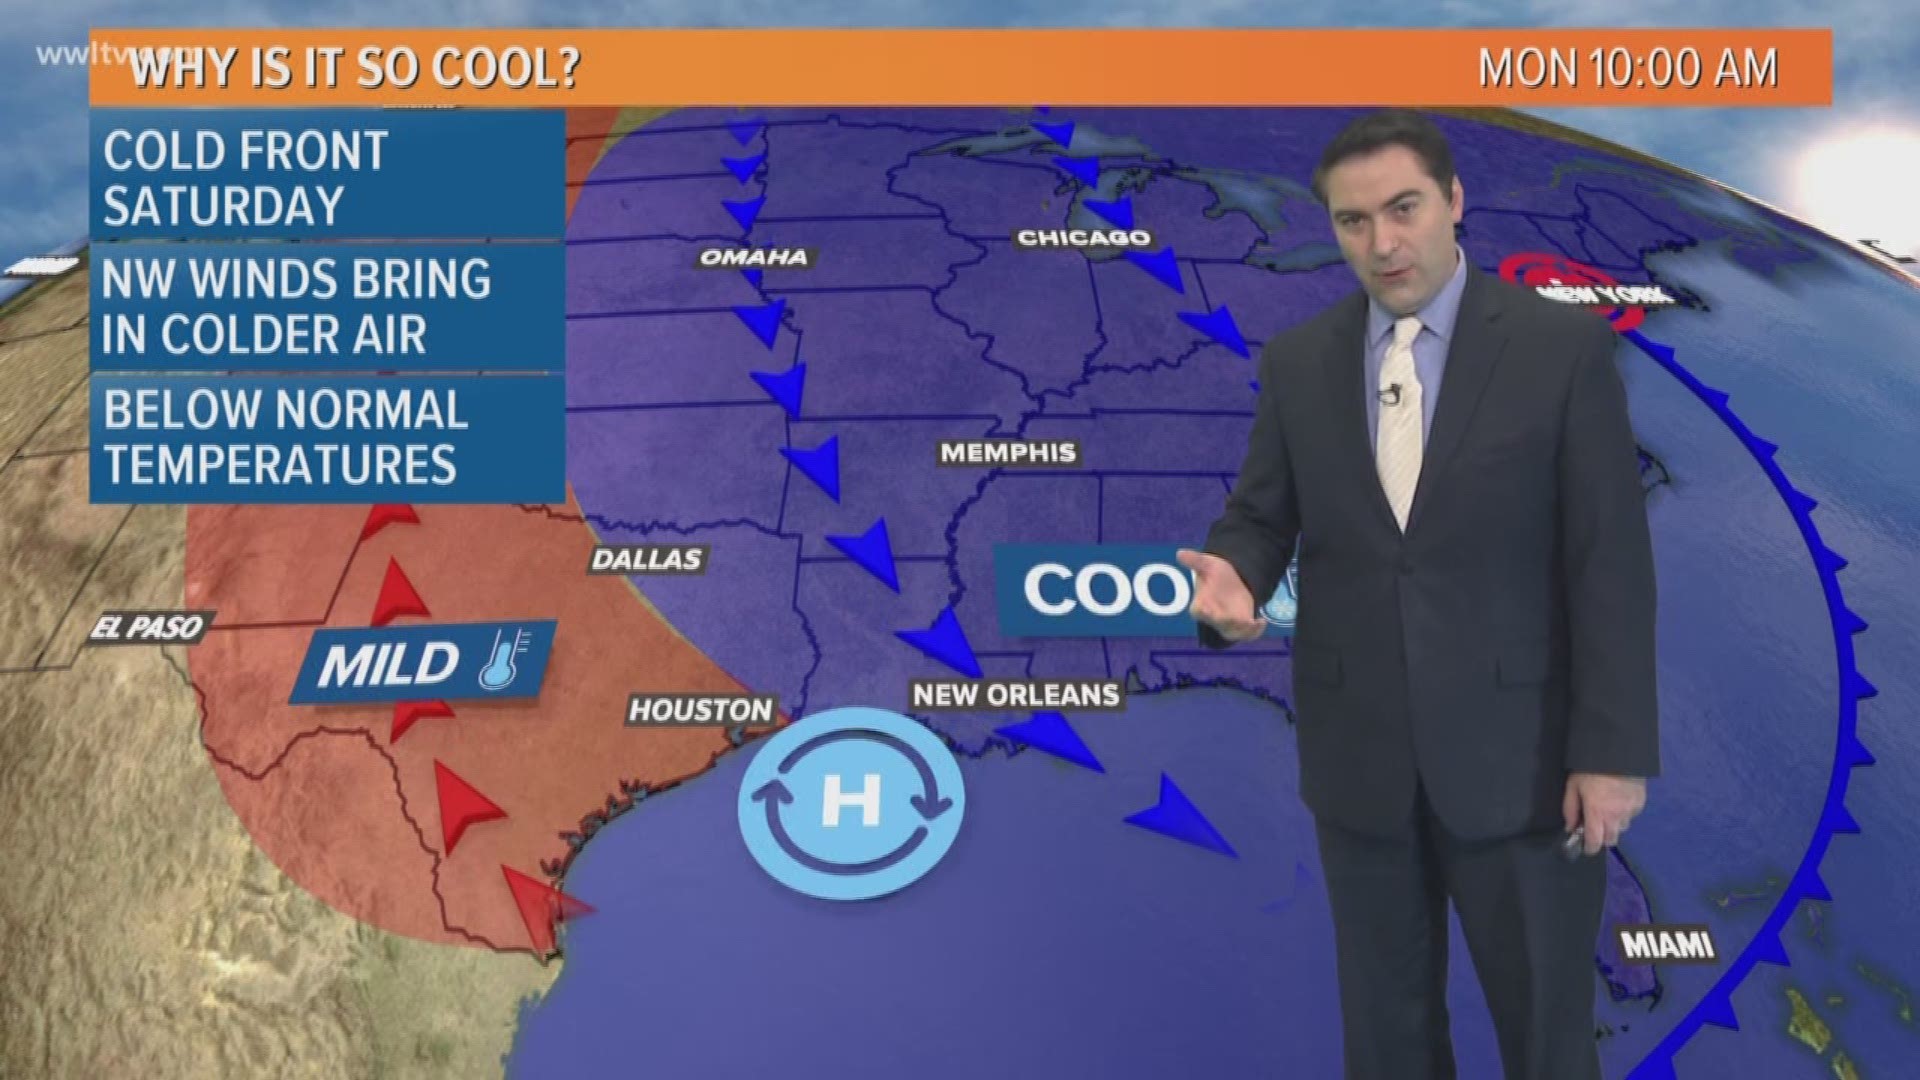 Meteorologist Dave Nussbaum says it will be a sunny and cool afternoon with warmer temperatures arriving tomorrow.